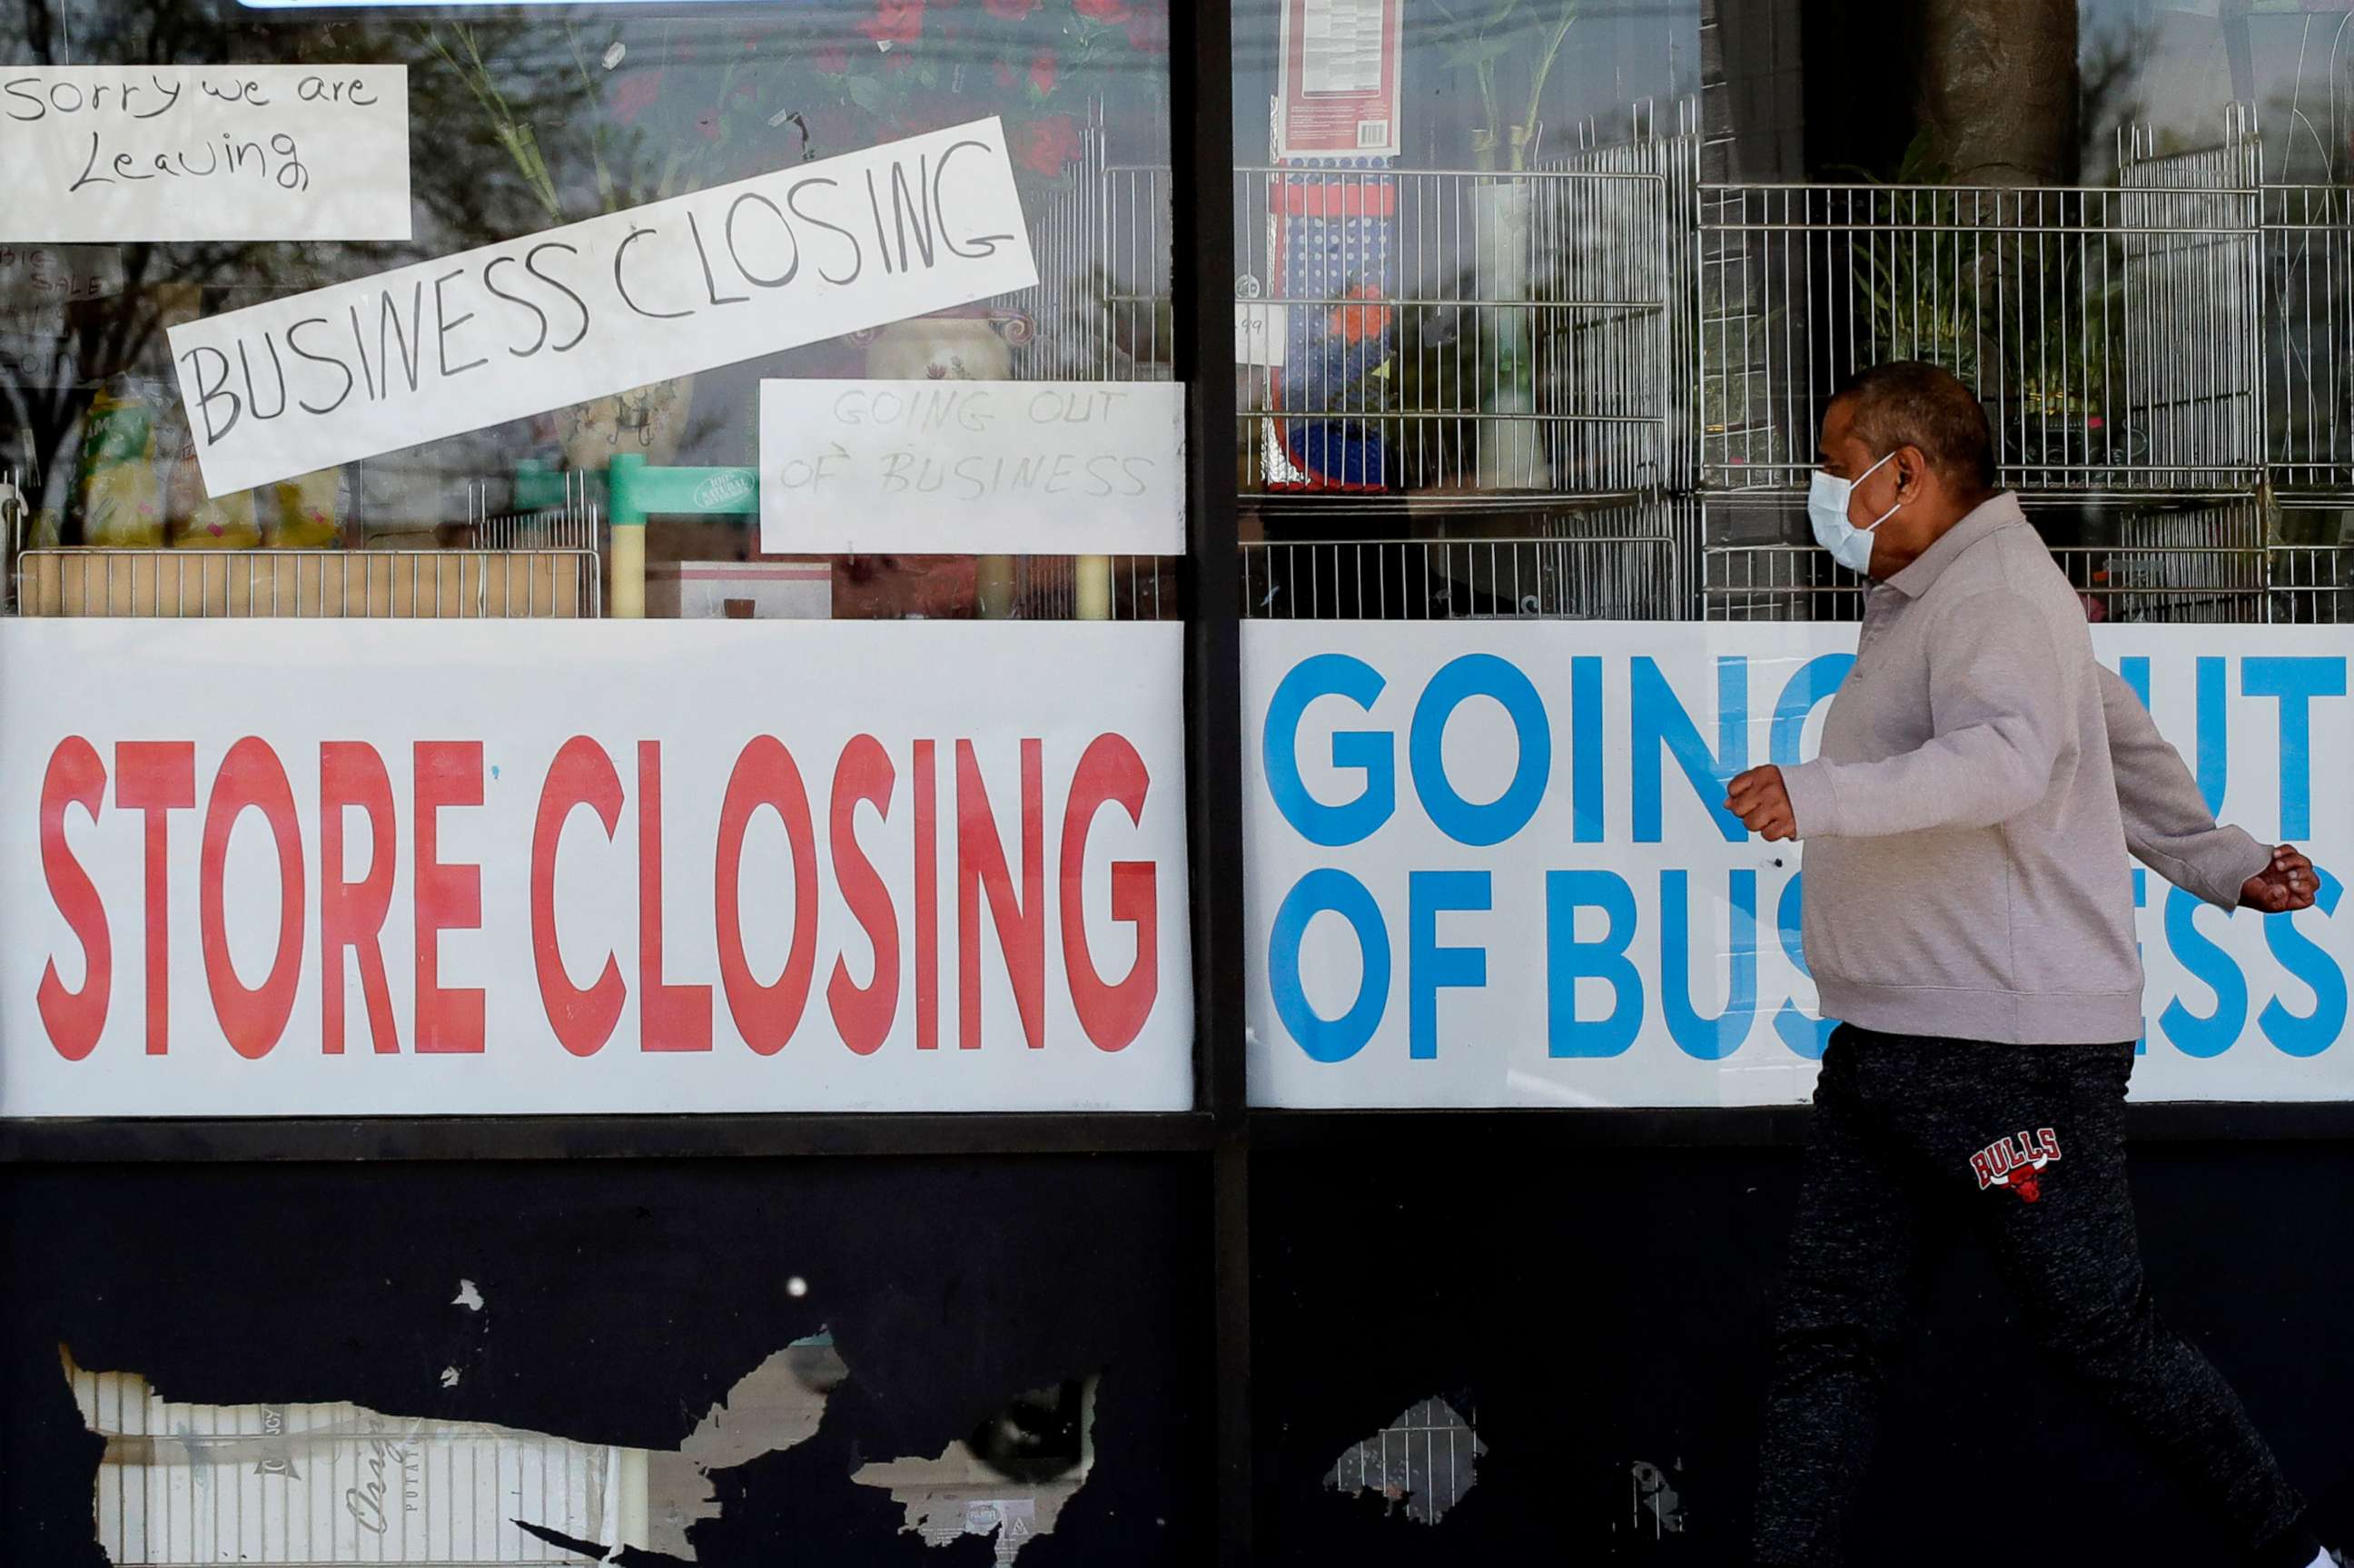 PHOTO:A man looks at signs of a closed store due to COVID-19 in Niles, Ill., May 21, 2020.